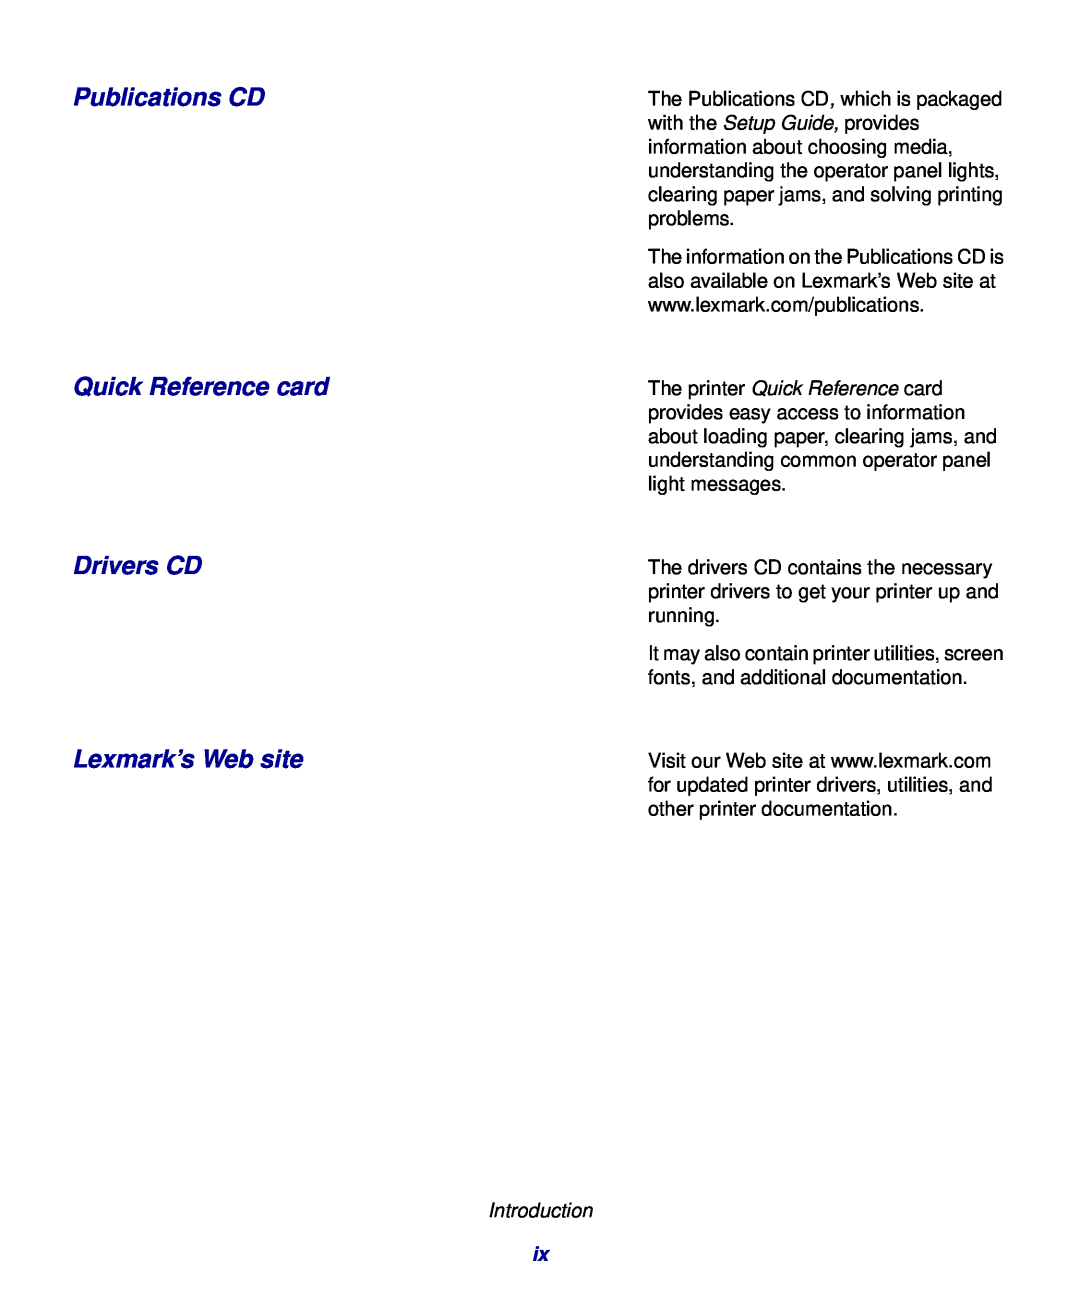 Lexmark 321, 323 setup guide Publications CD Quick Reference card Drivers CD, Lexmark’s Web site 